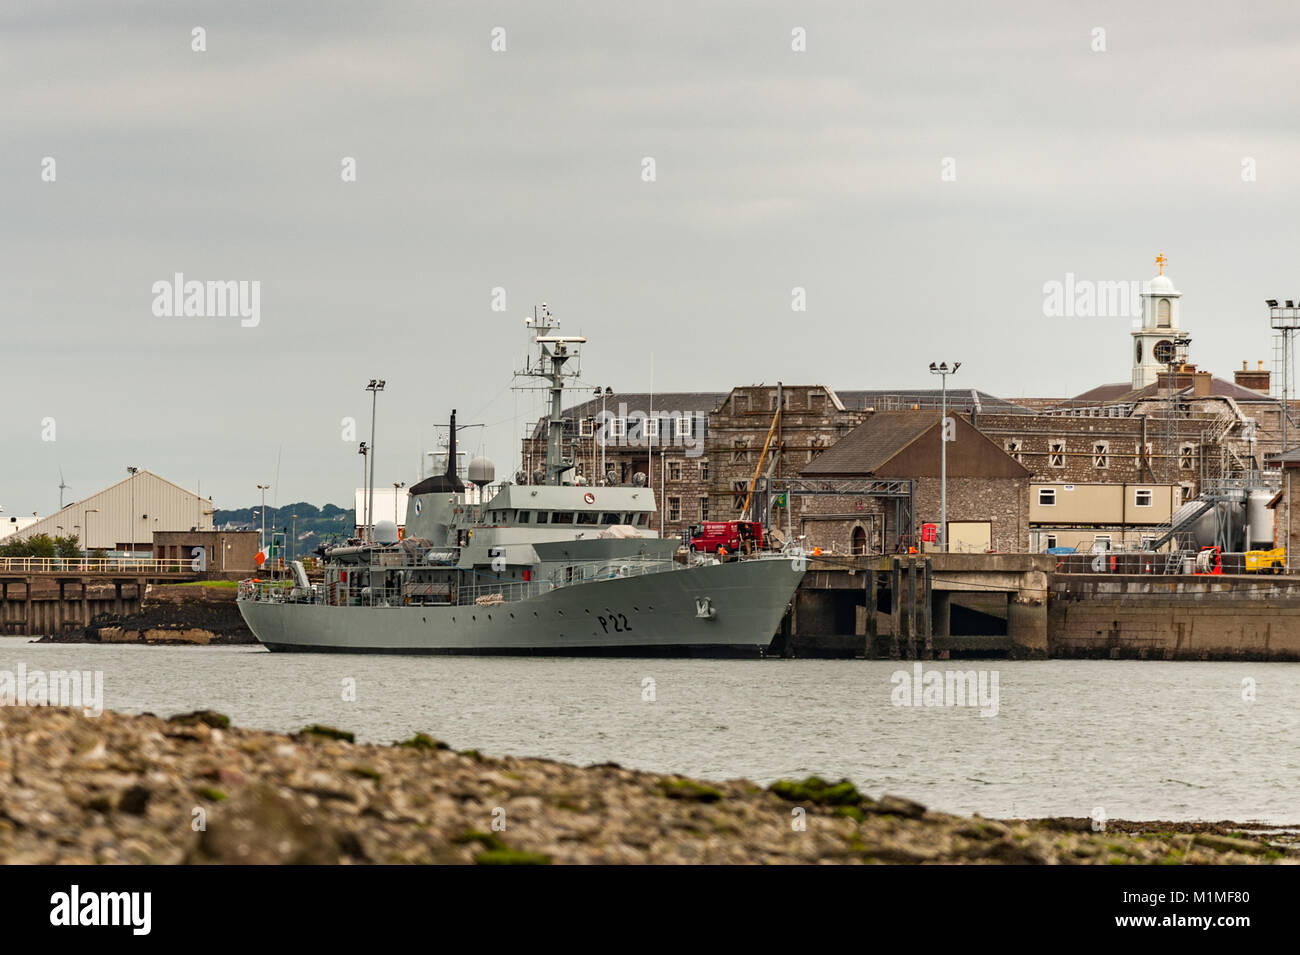 Irish Naval patrol vessle LÉ Aoife (now a Maltese Armed Forces vessel) moored at Haulbowline Island, Ireland, the base of the Irish Navy. Stock Photo